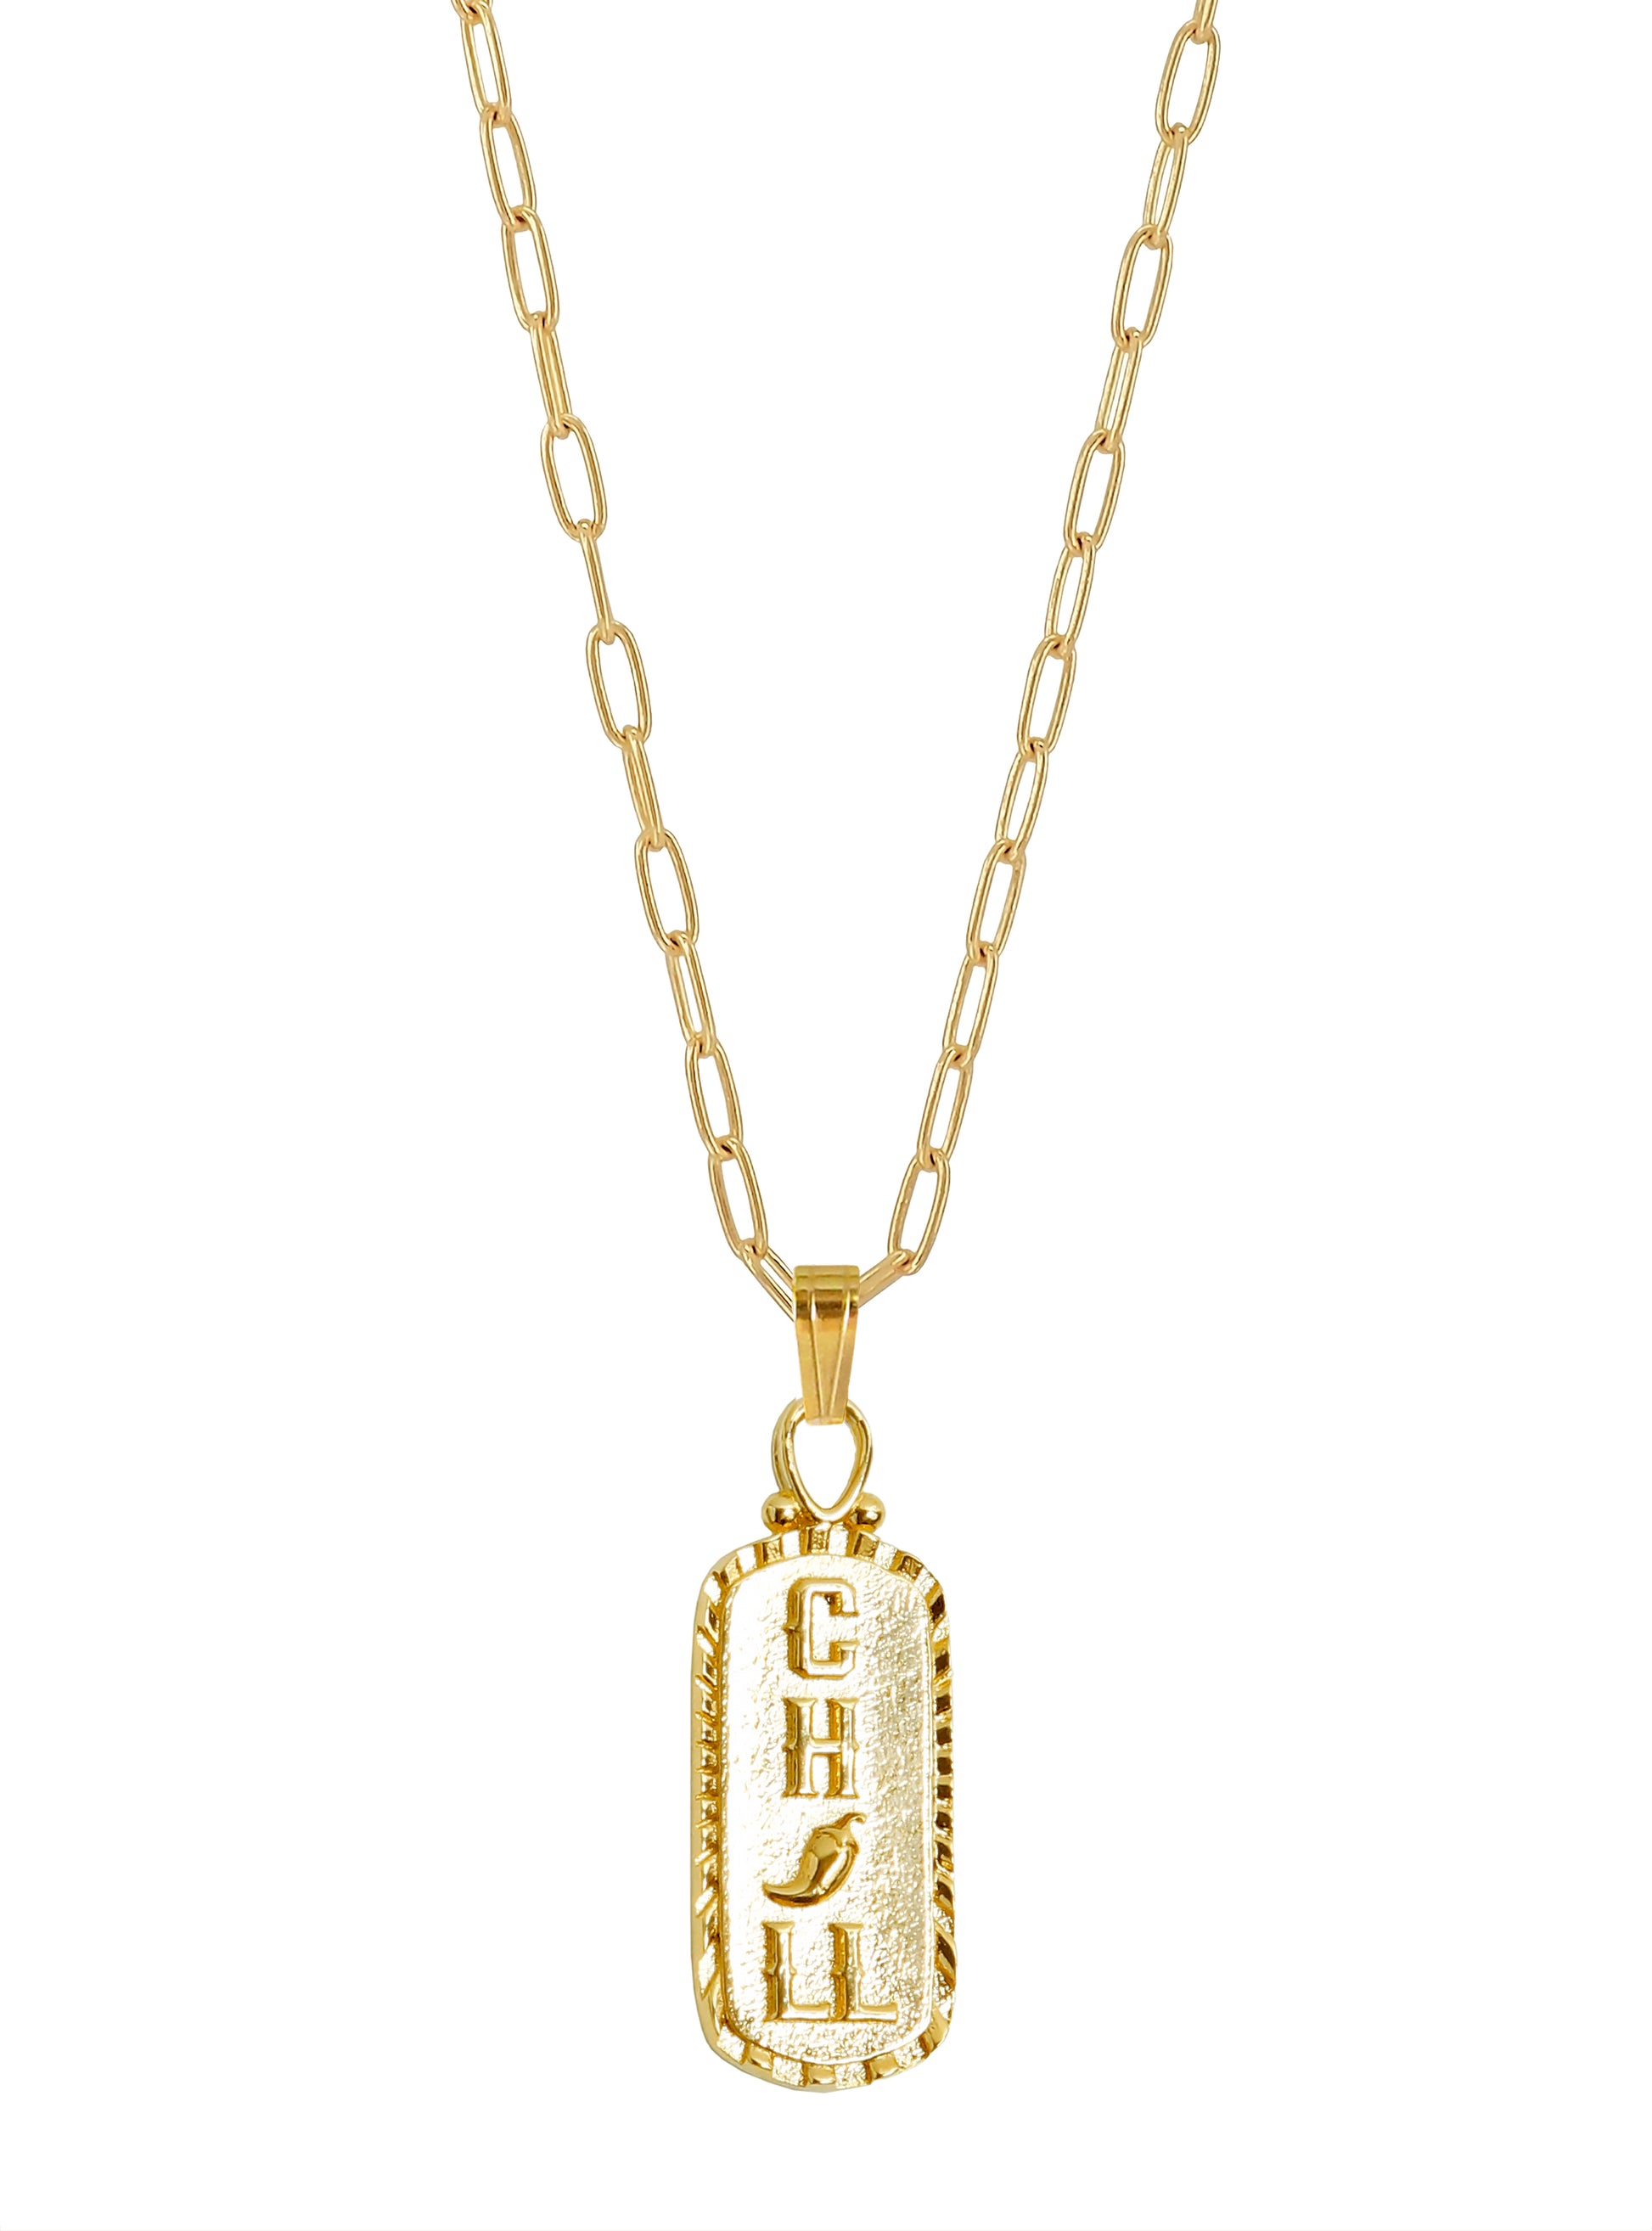 Chill Talisman Necklace, Gold plated Silver, Gender Neutral